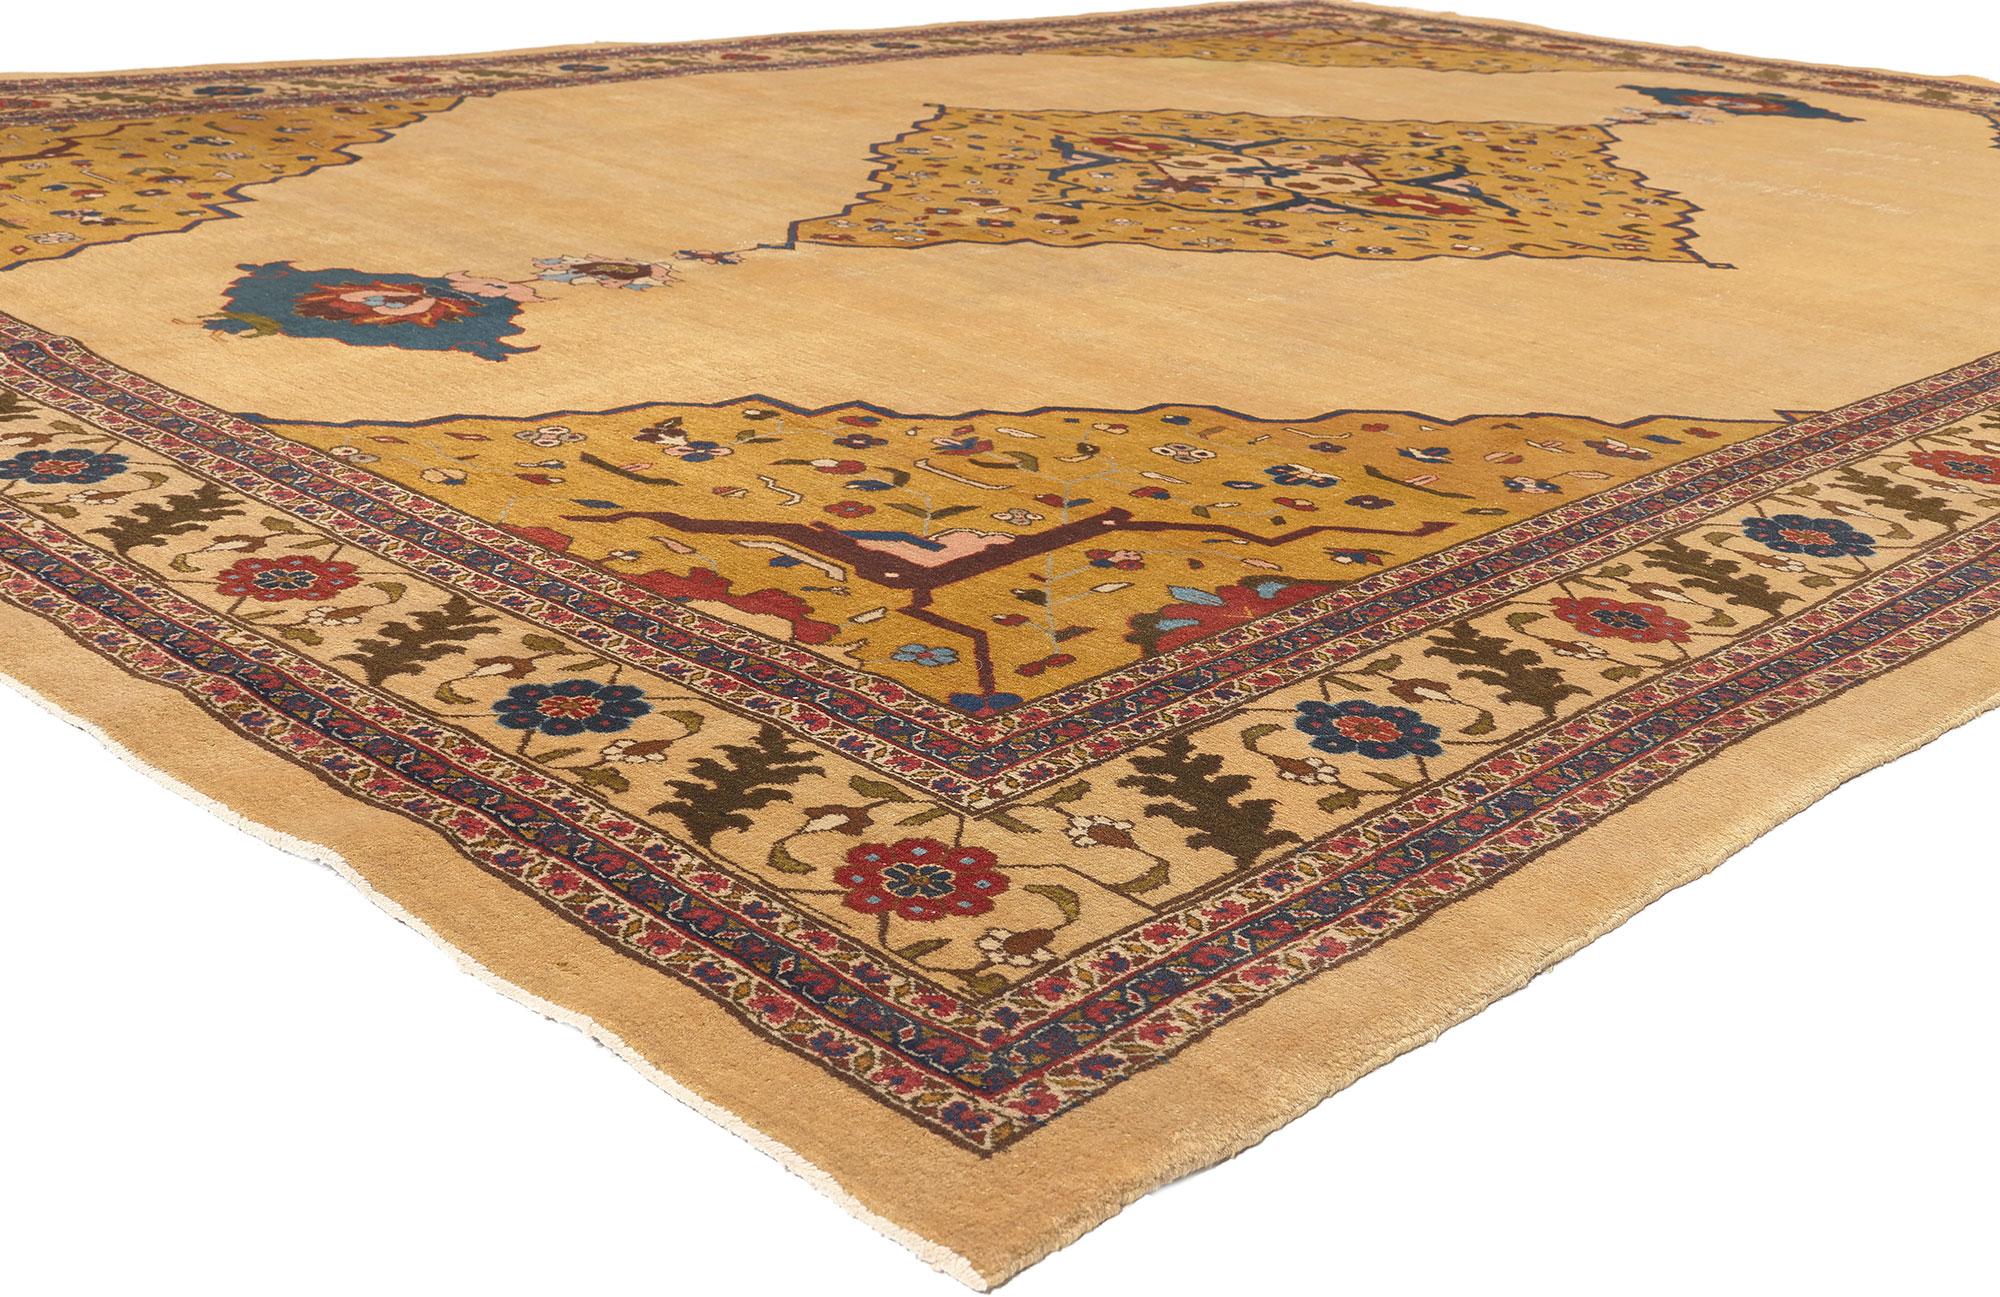 52657 Antique Indian Agra Rug, 10'02 x 13'07. 
Art Deco meets traditional elegance in this hand knotted wool antique Indian Agra rug. The rectilinear geometry and warm earth-tone colors woven into this piece work together resulting in a refined and